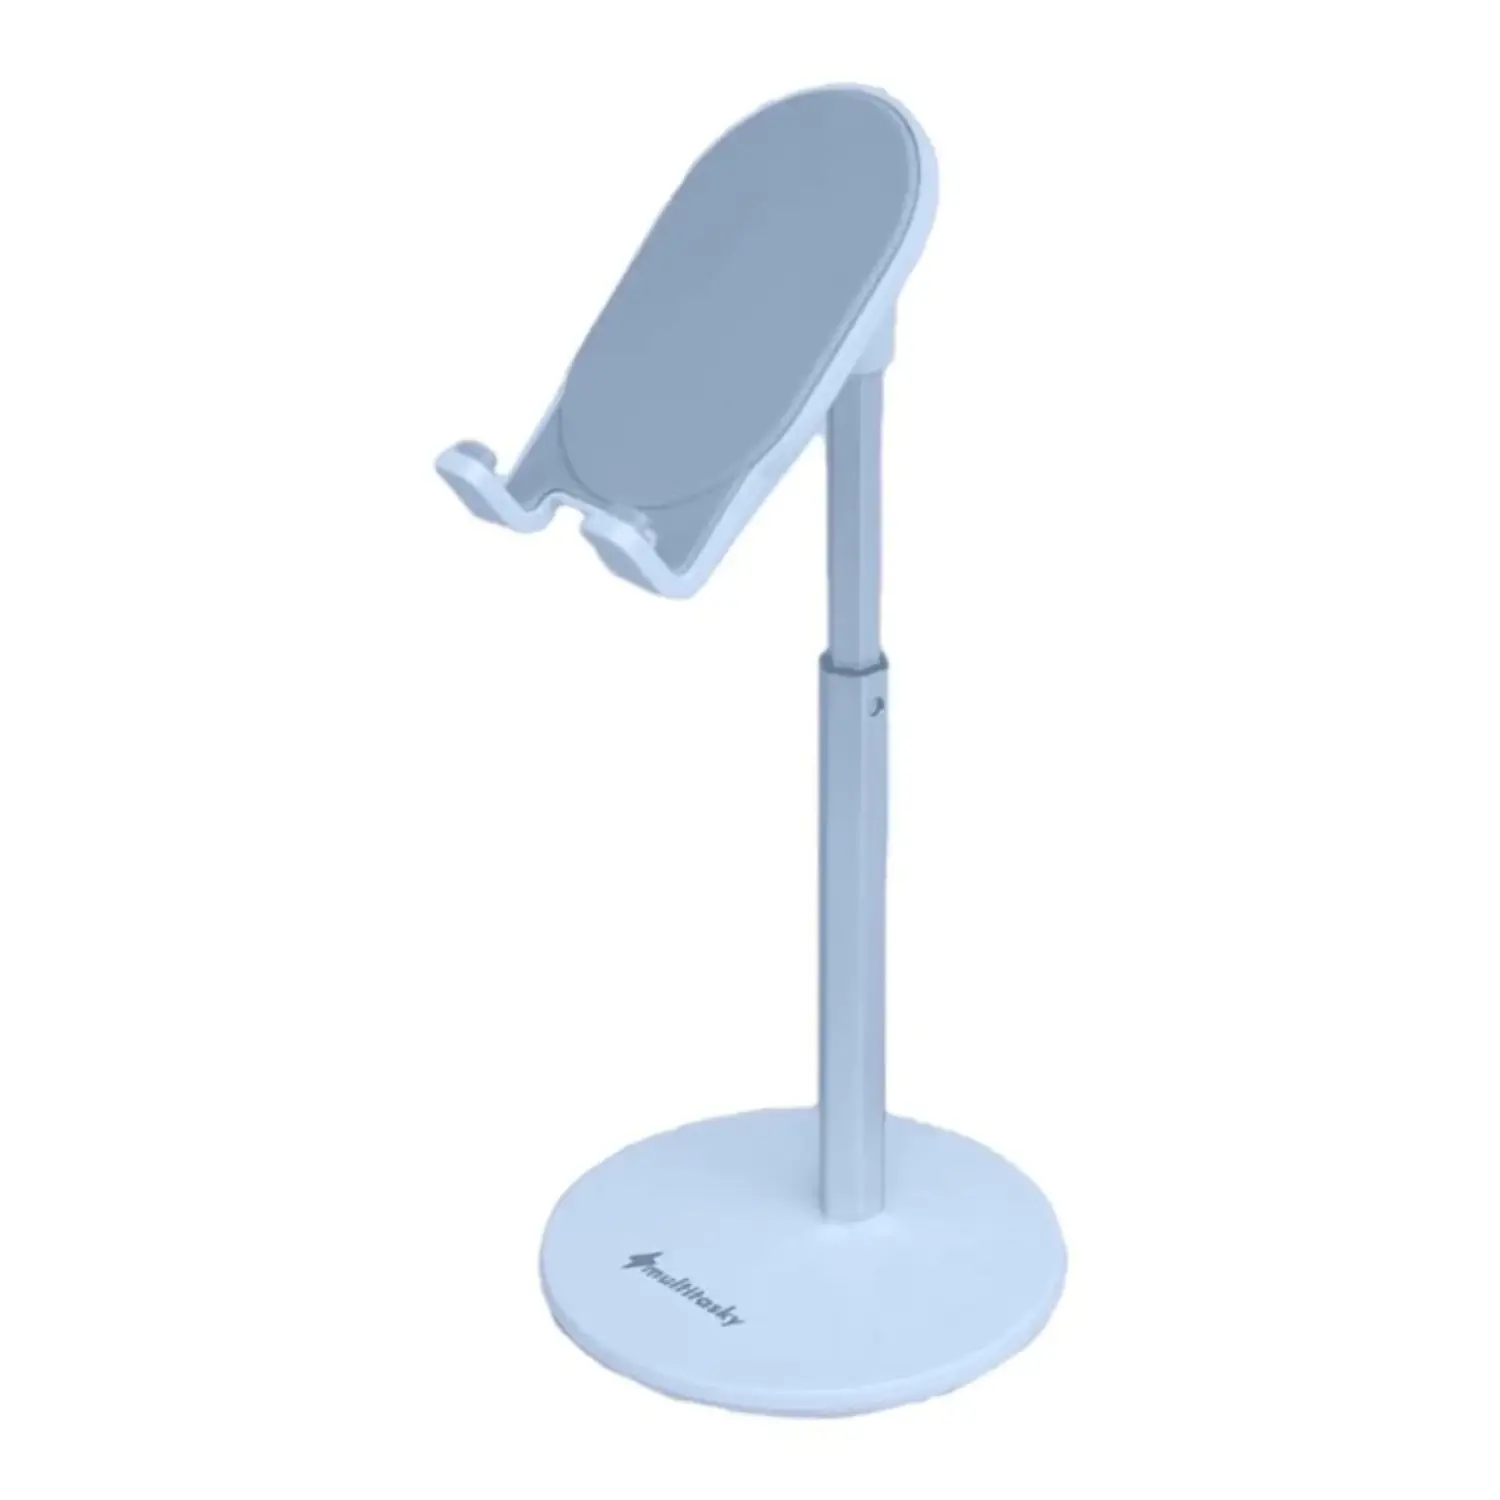 Multi-Angle Extendable Desk Cell Phone Holder And iPad Stand